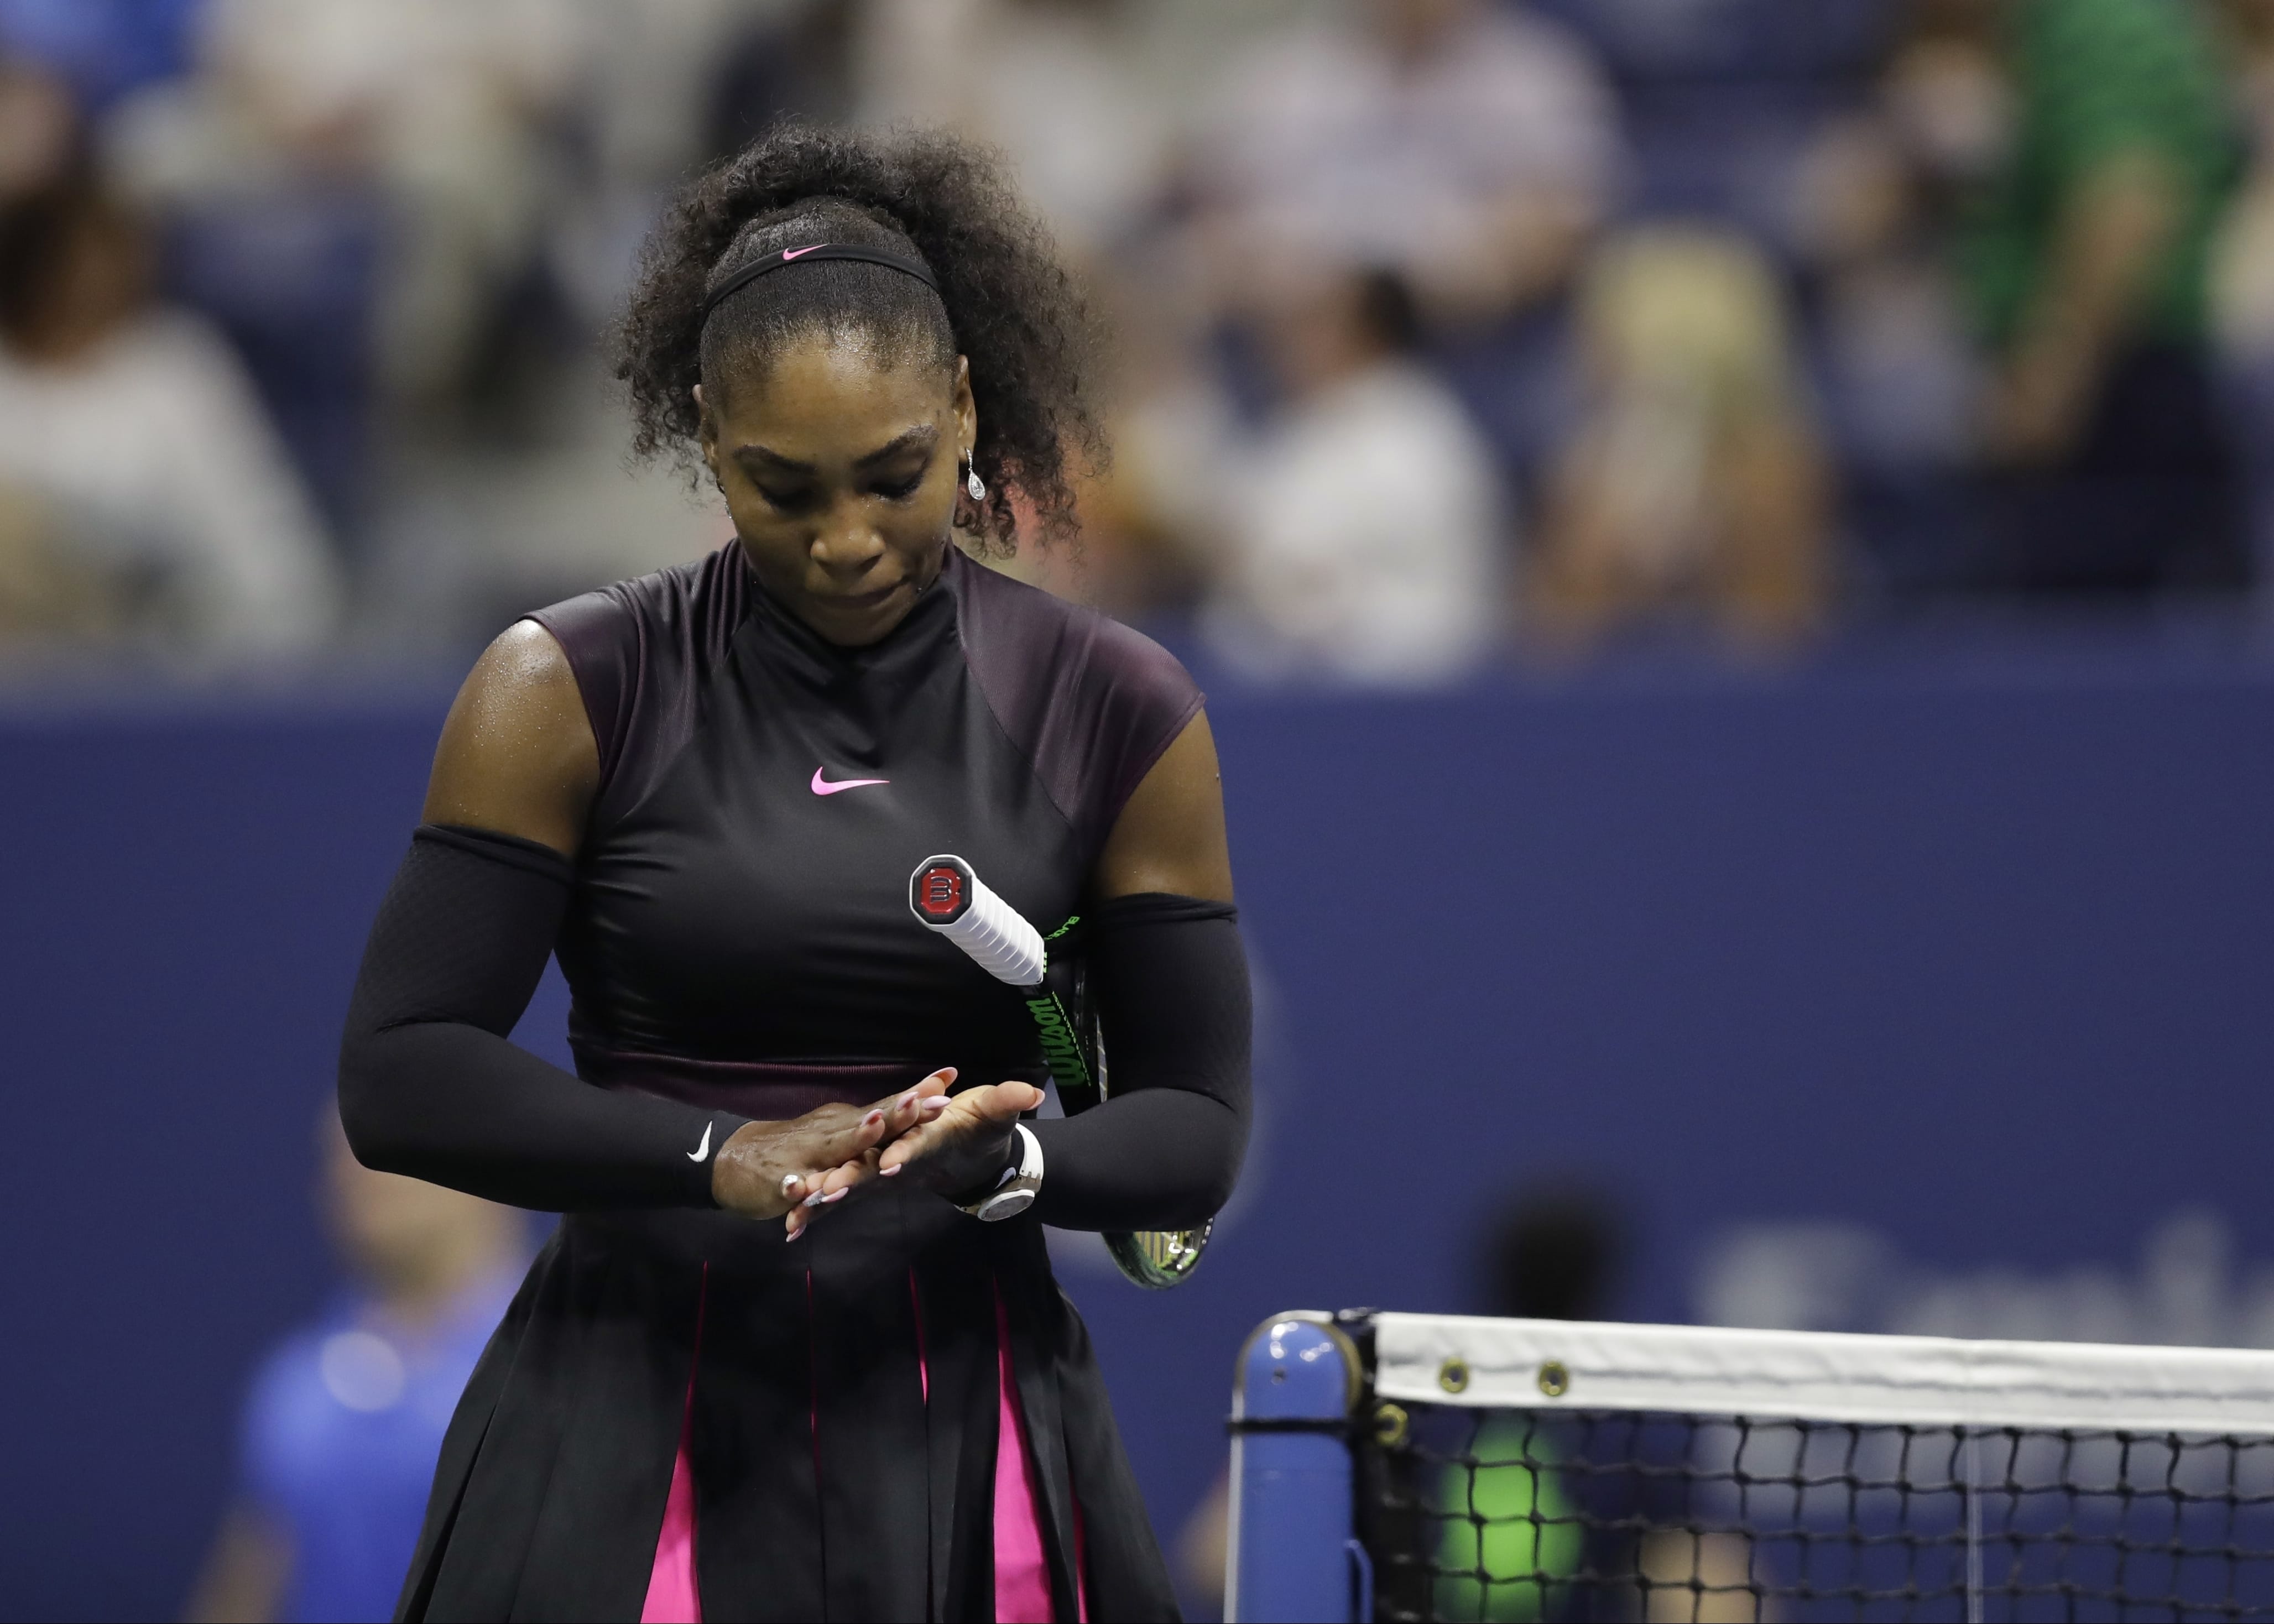 Serena Williams walks to the other side of the court during a changeover during the semifinals of the U.S. Open tennis tournament against Karolina Pliskova, of the Czech Republic, Thursday, Sept. 8, 2016, in New York.